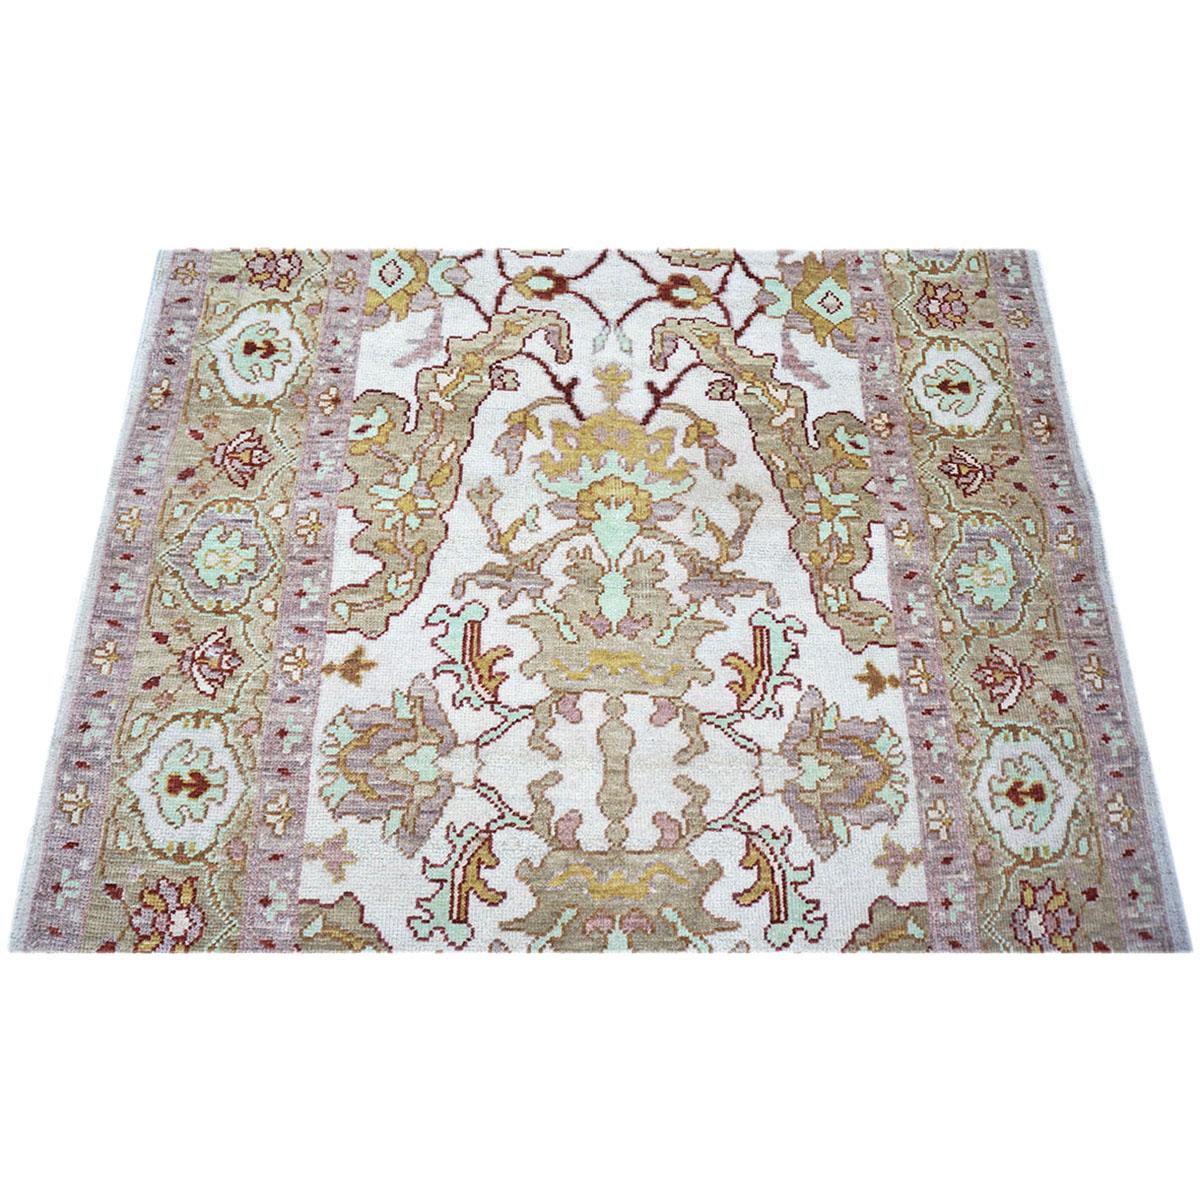 Contemporary 20th Century Persian Sultanabad 4x17 Tan & Ivory Handmade Hall Runner Rug For Sale